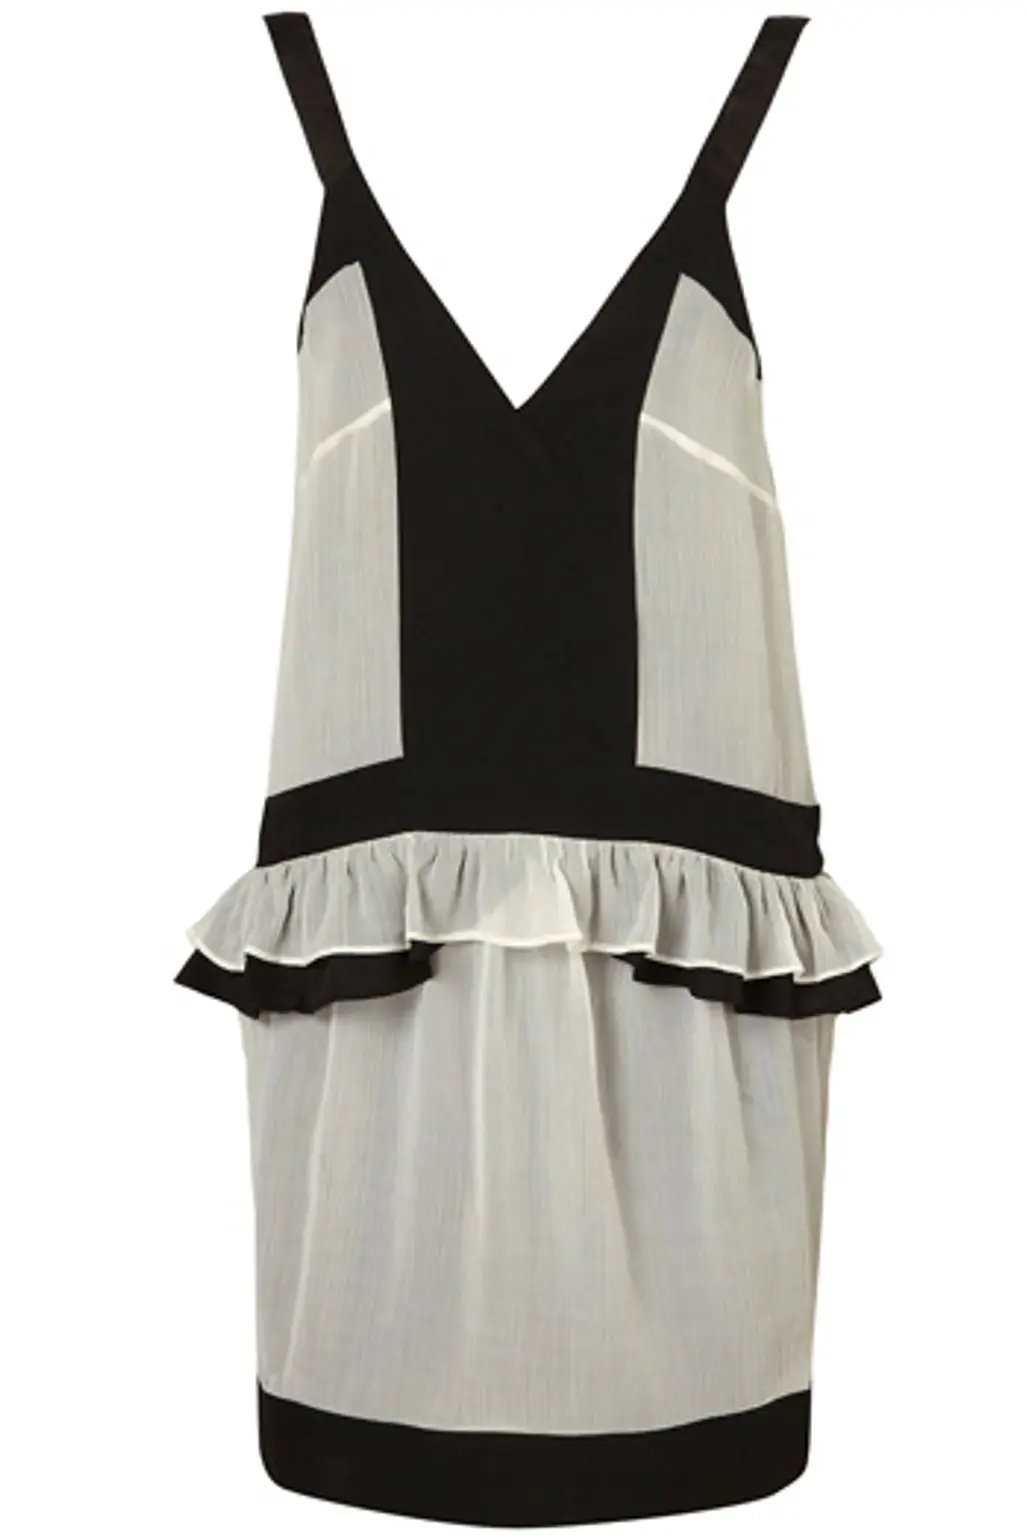 Topshop Limited Edition Twin Frill Dress